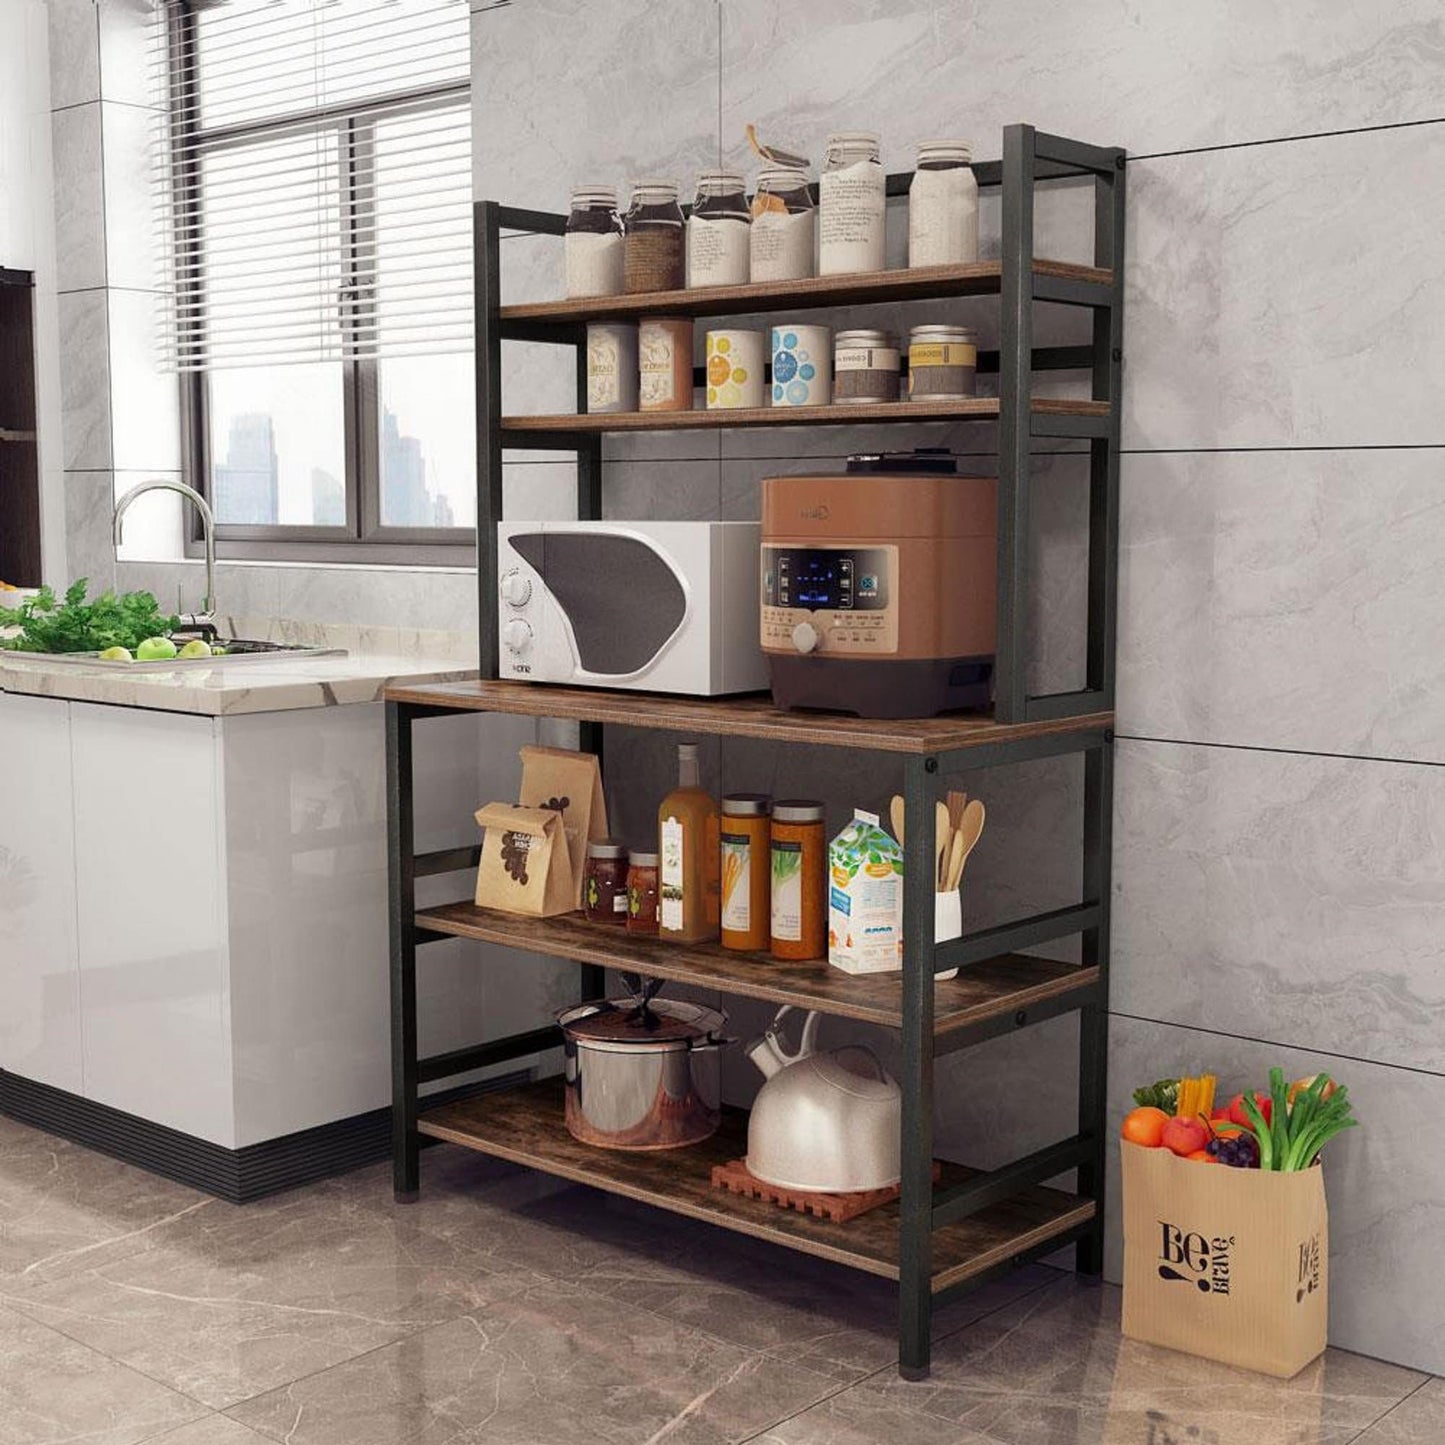 5-Tier Kitchen Bakers Rack with Hutch, Industrial Microwave Oven Stand